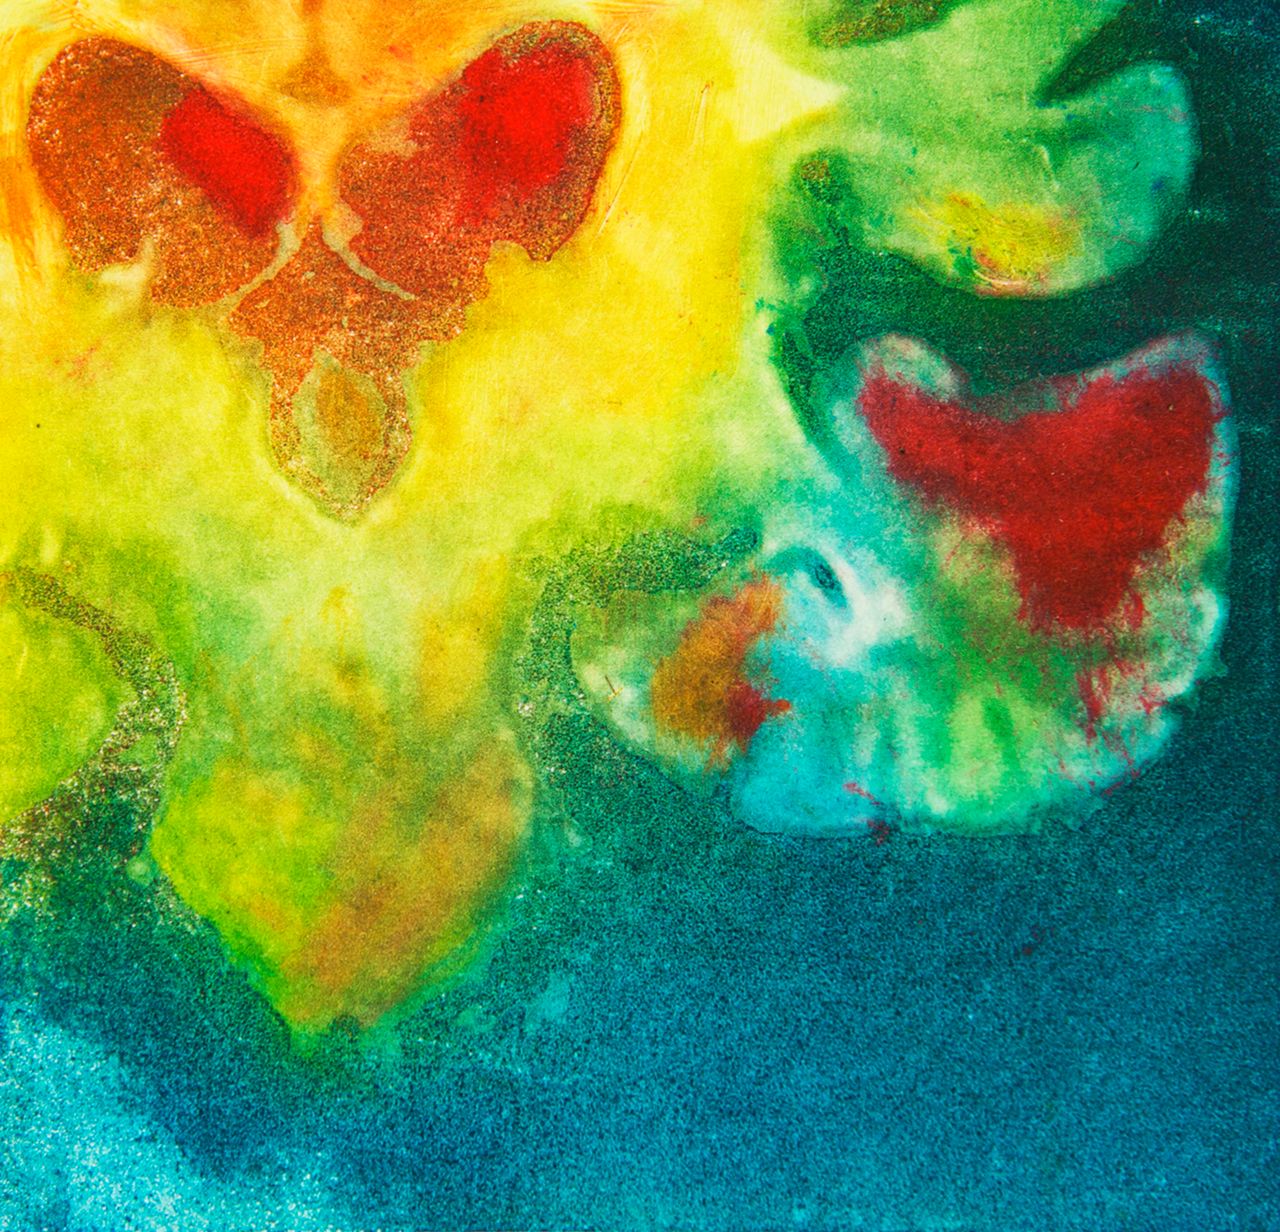 "Valentine," a coronal view of the brain stem, cerebellum, and lateral ventricles.